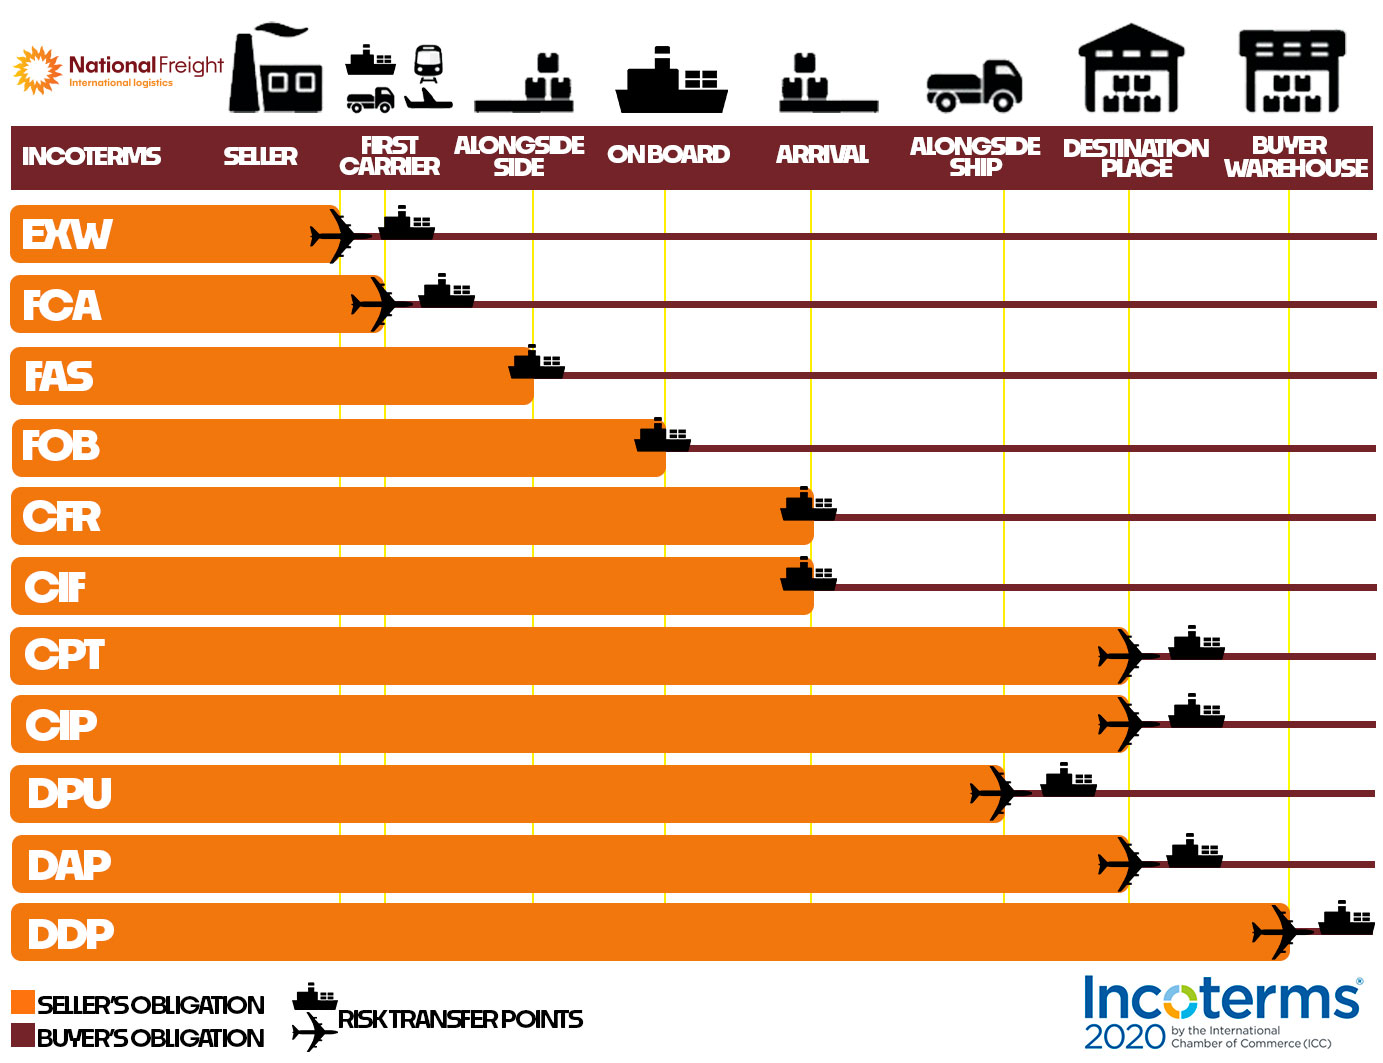 INCOTERMS National Freight